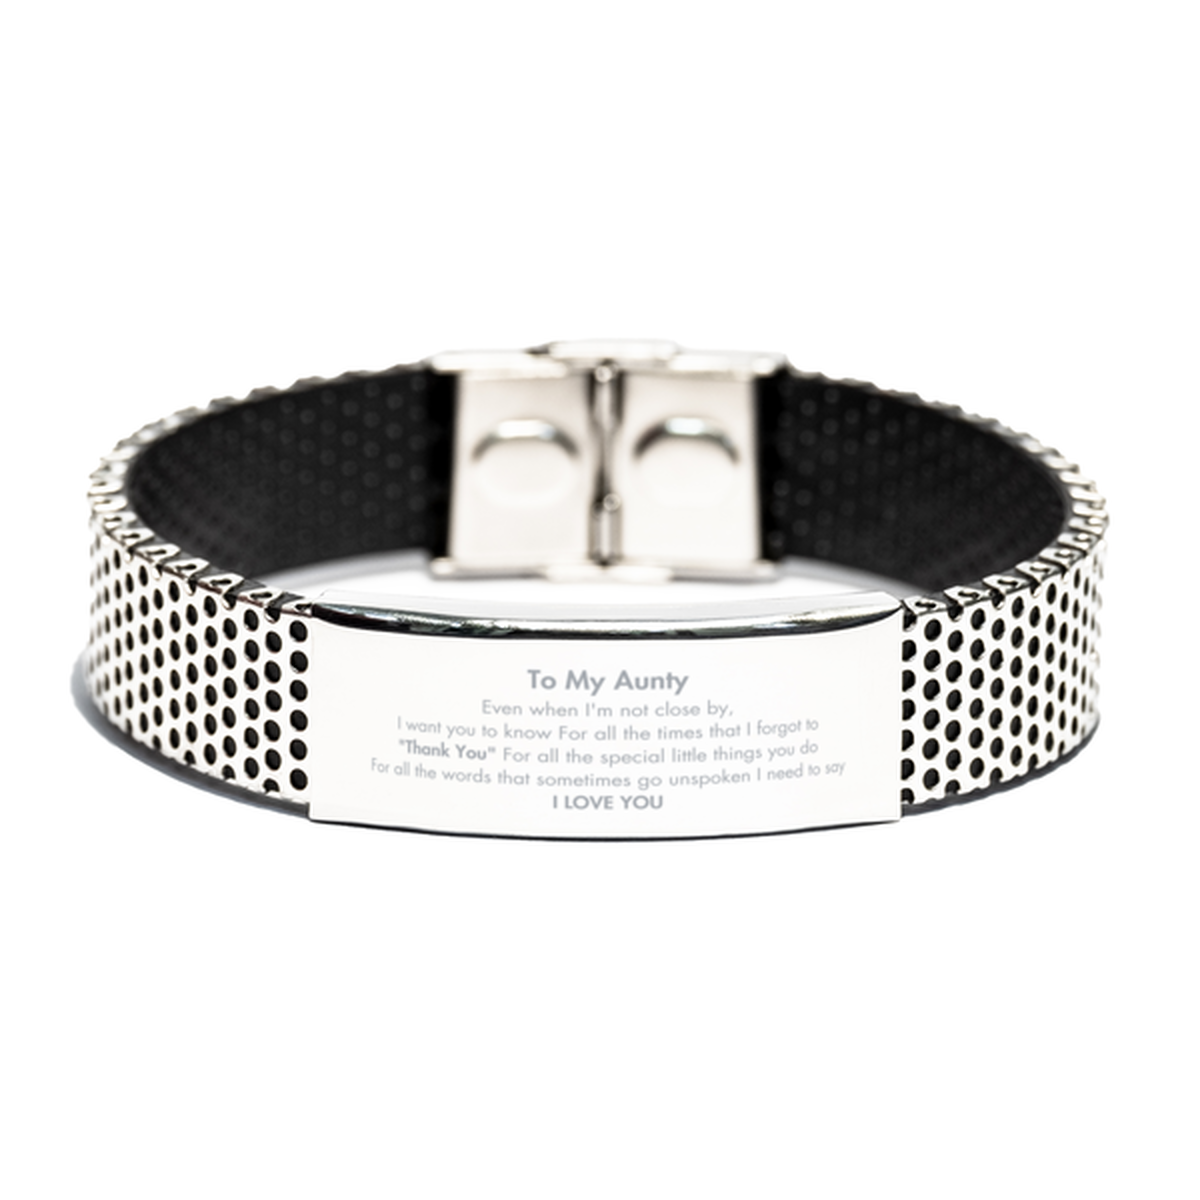 Thank You Gifts for Aunty, Keepsake Stainless Steel Bracelet Gifts for Aunty Birthday Mother's day Father's Day Aunty For all the words That sometimes go unspoken I need to say I LOVE YOU